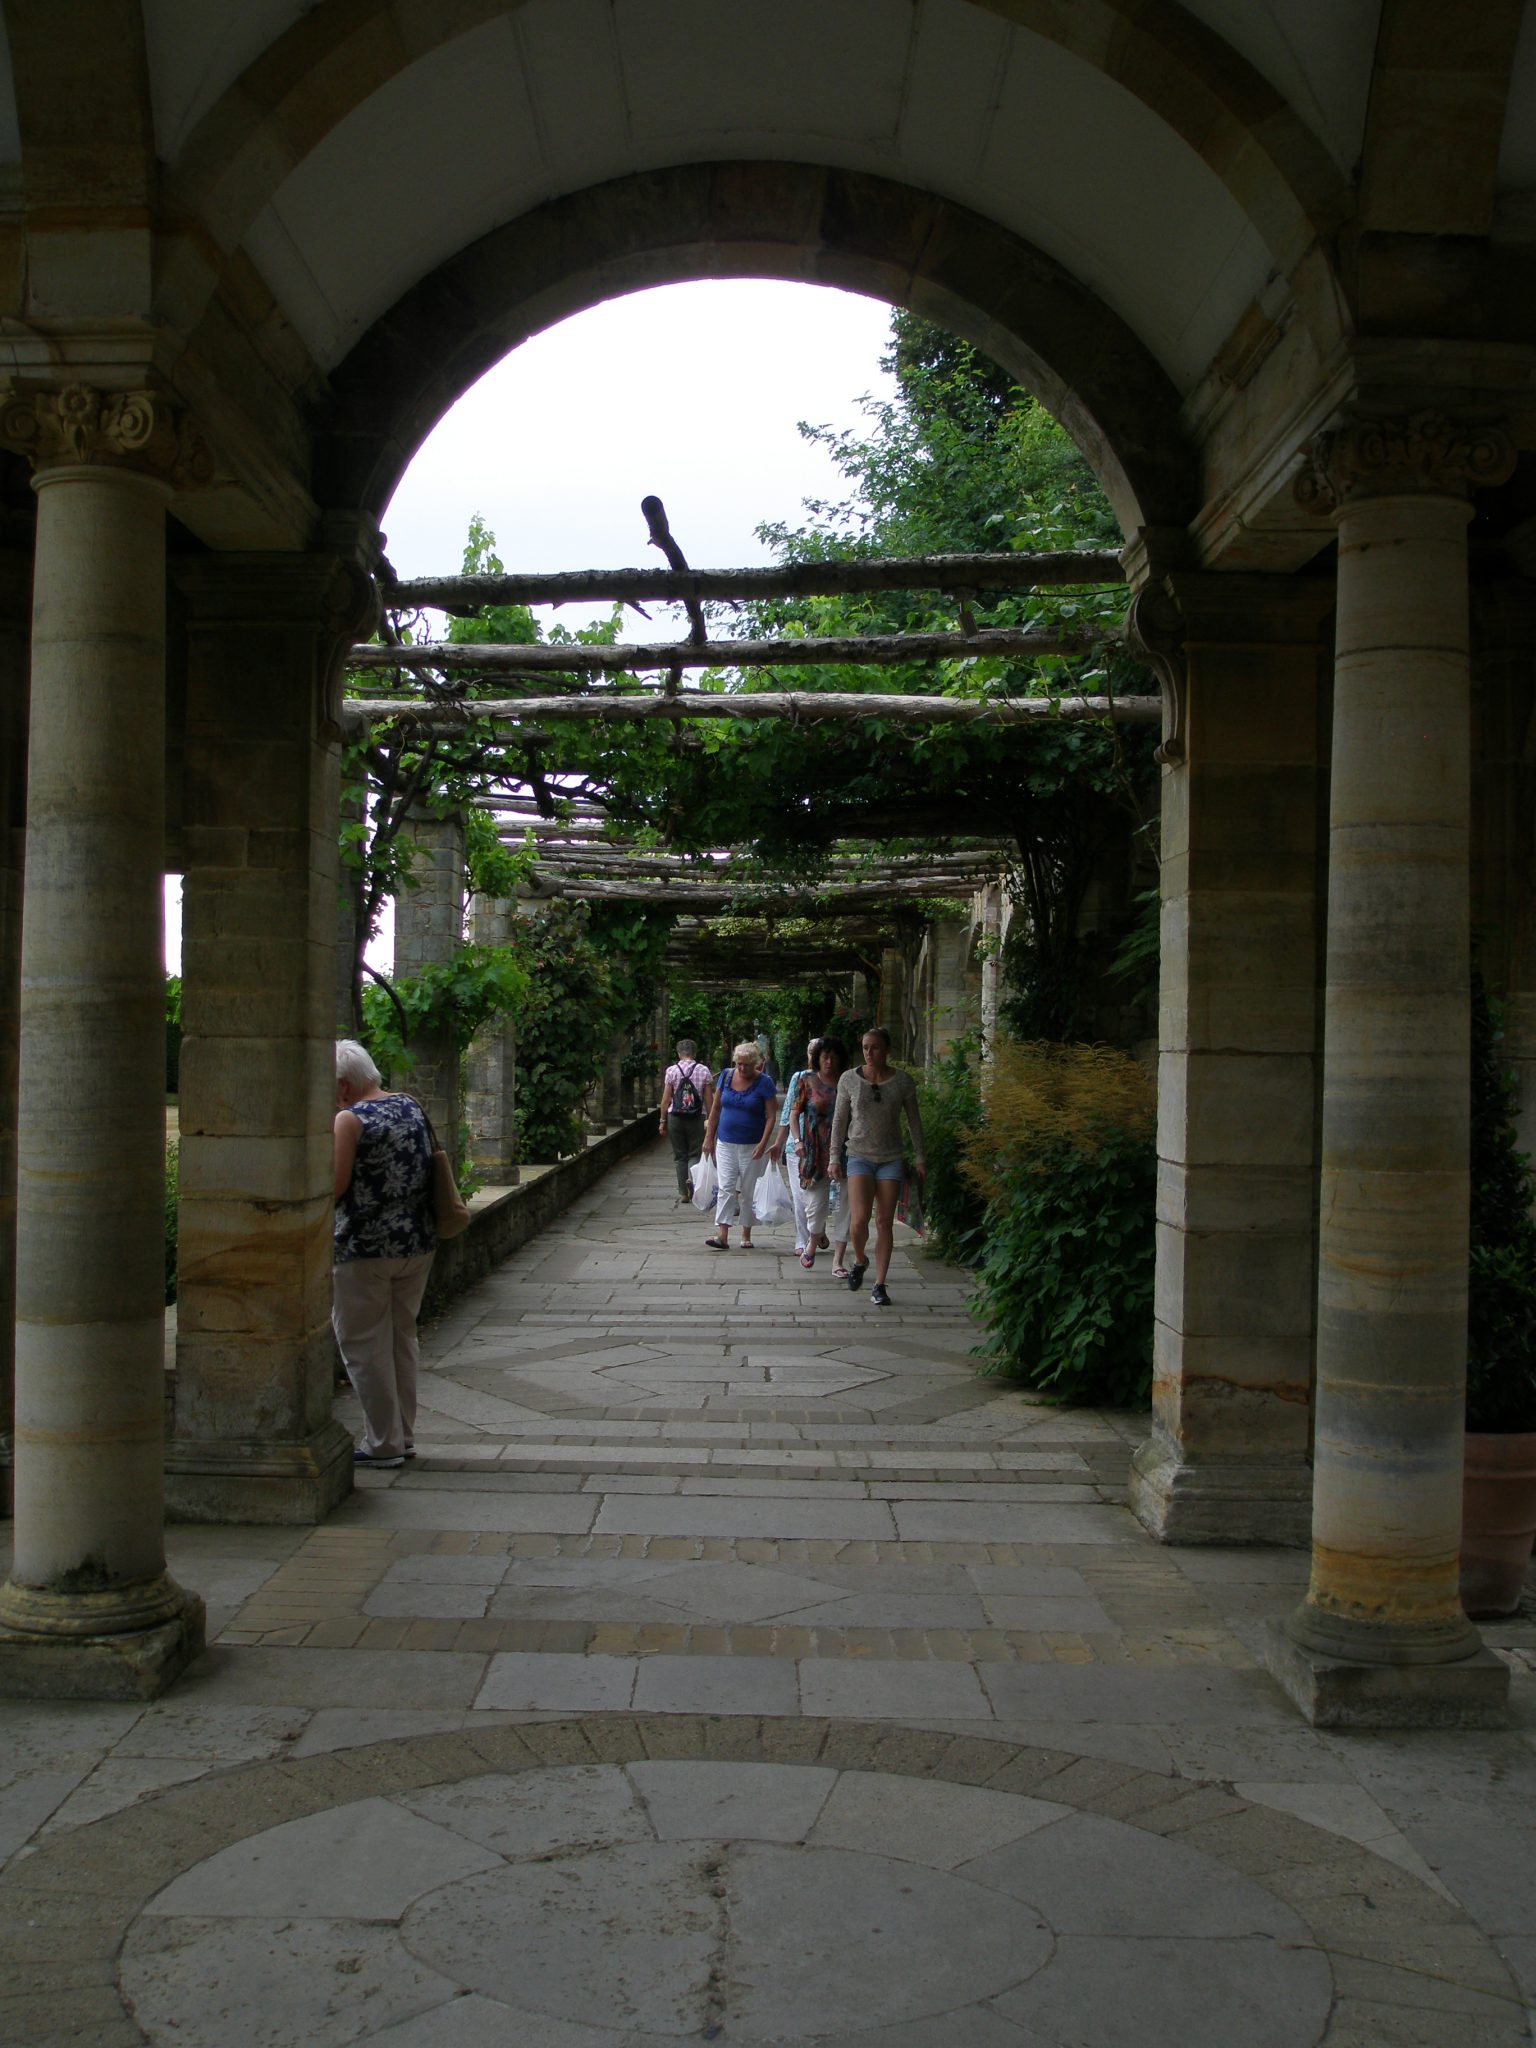 Rustin wooden Loggias extend along the length of the southern side of the Italian Garden